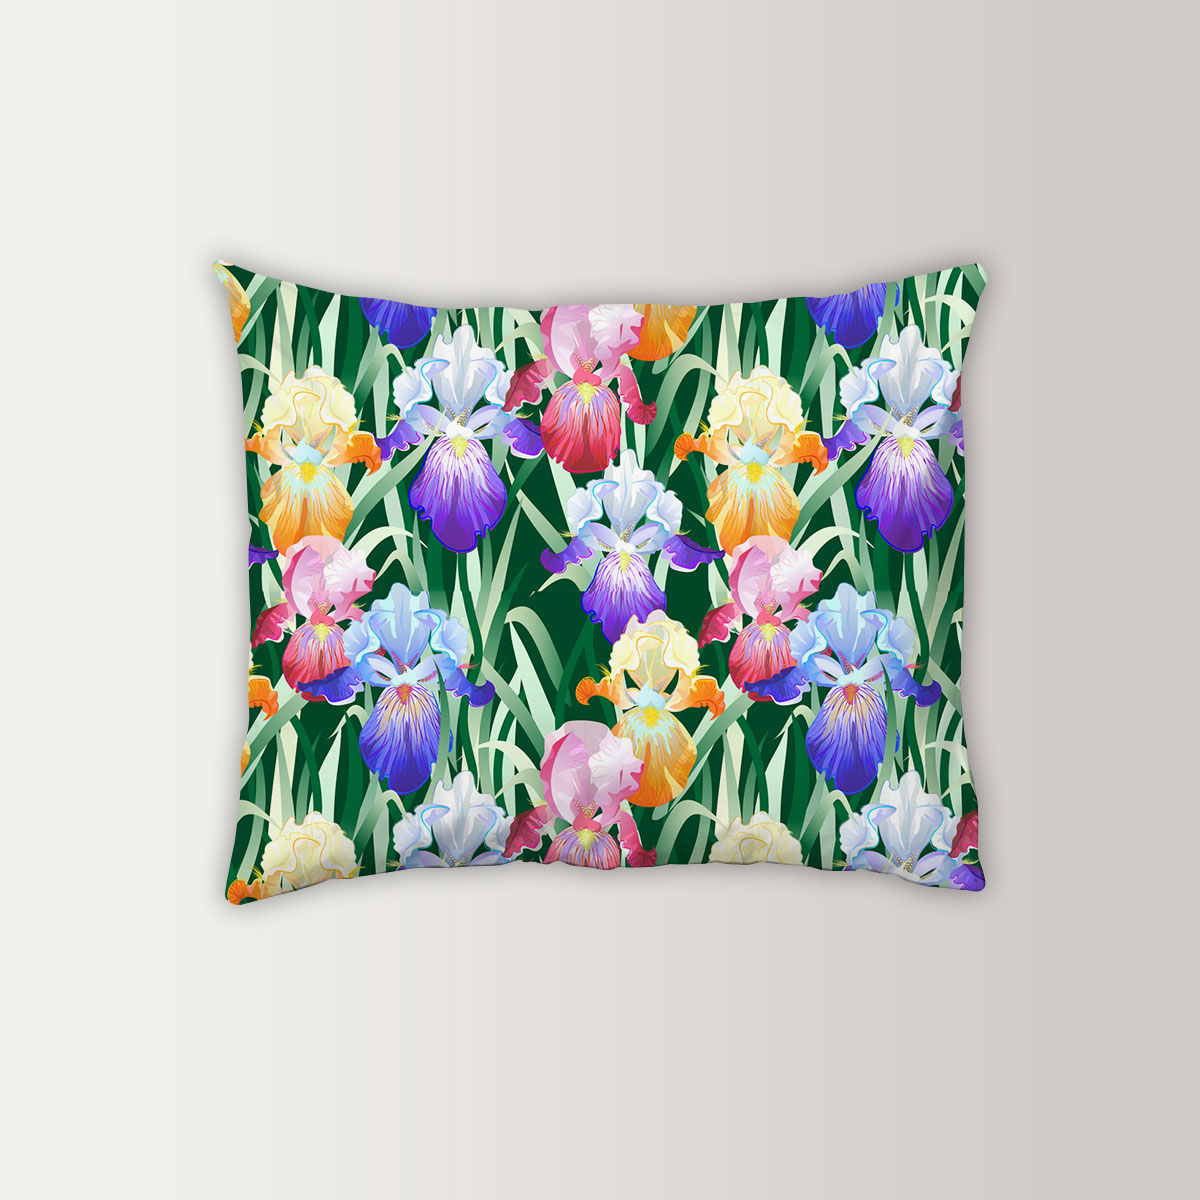 Colorful Iris Flowers And Green Leaves Pillow Case